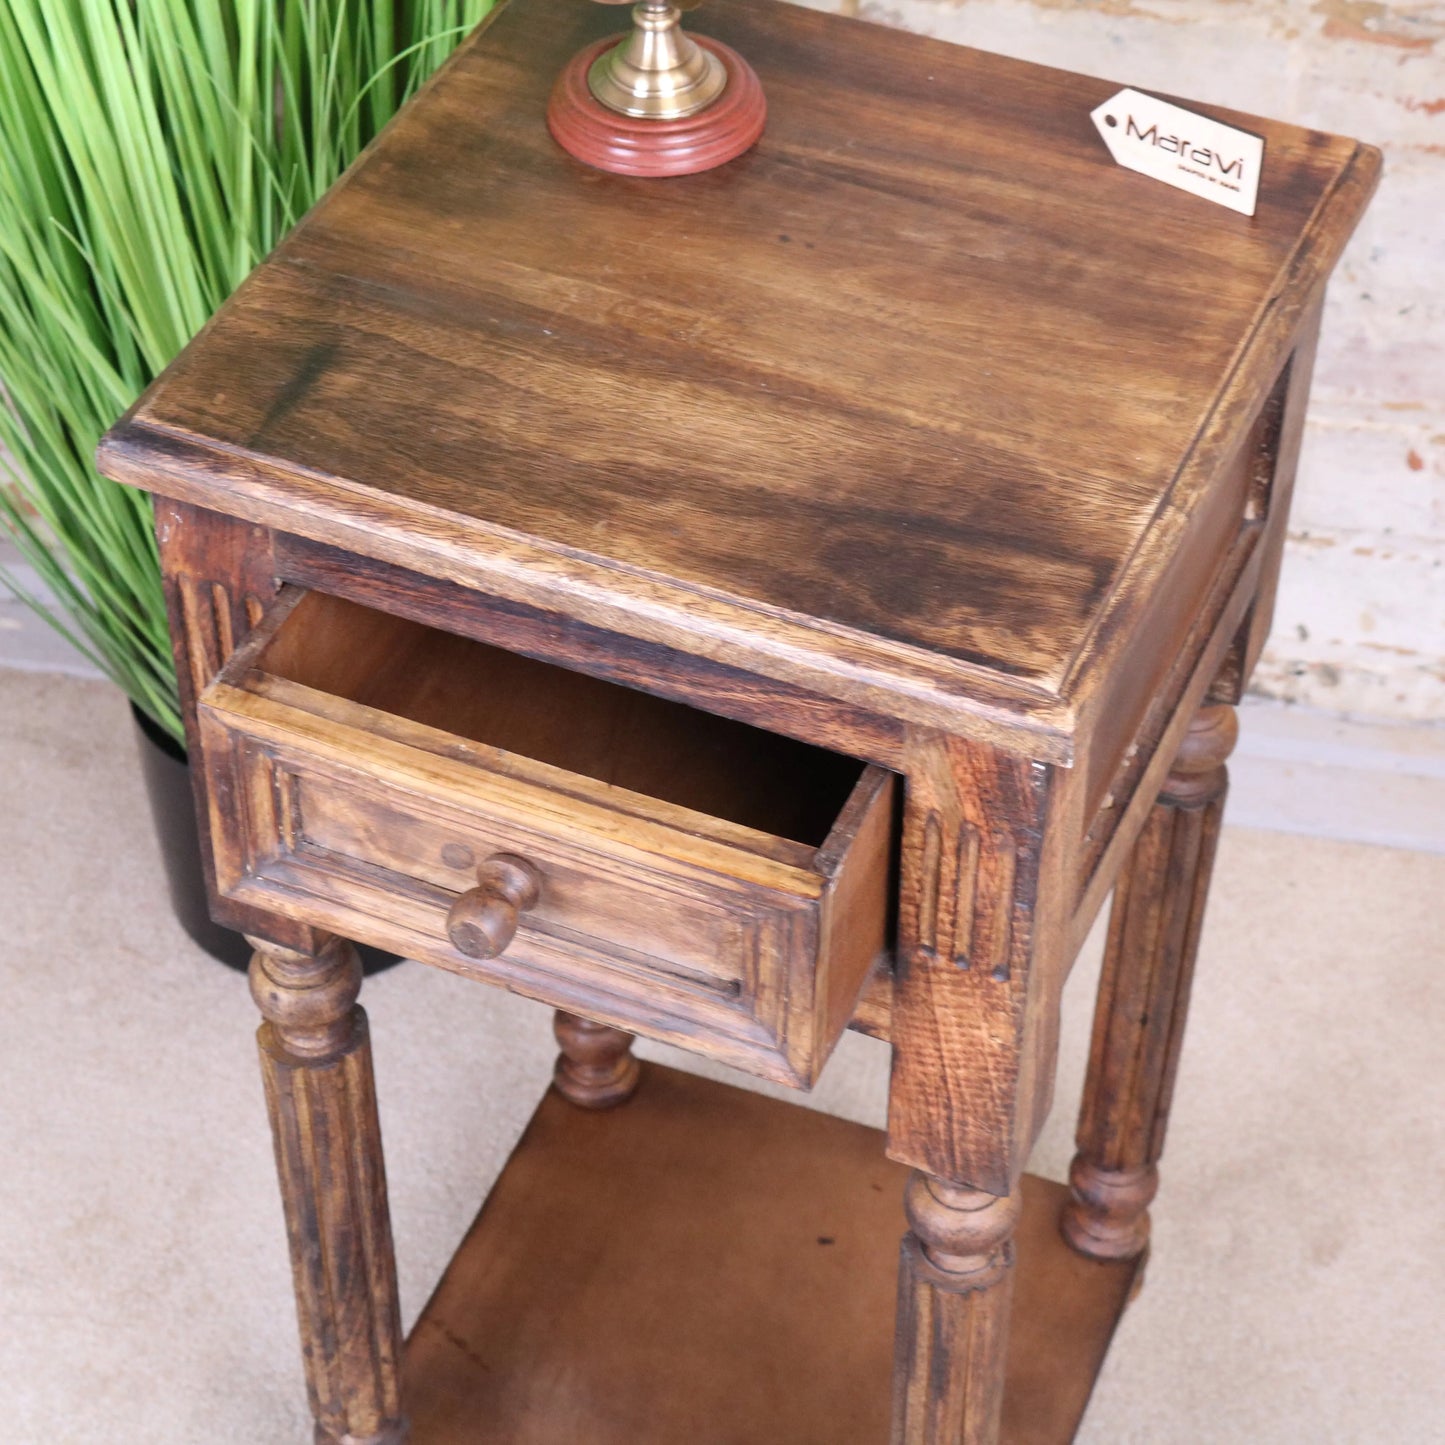 Toyani Square Tall Display Table Burnt Wood Open Drawer